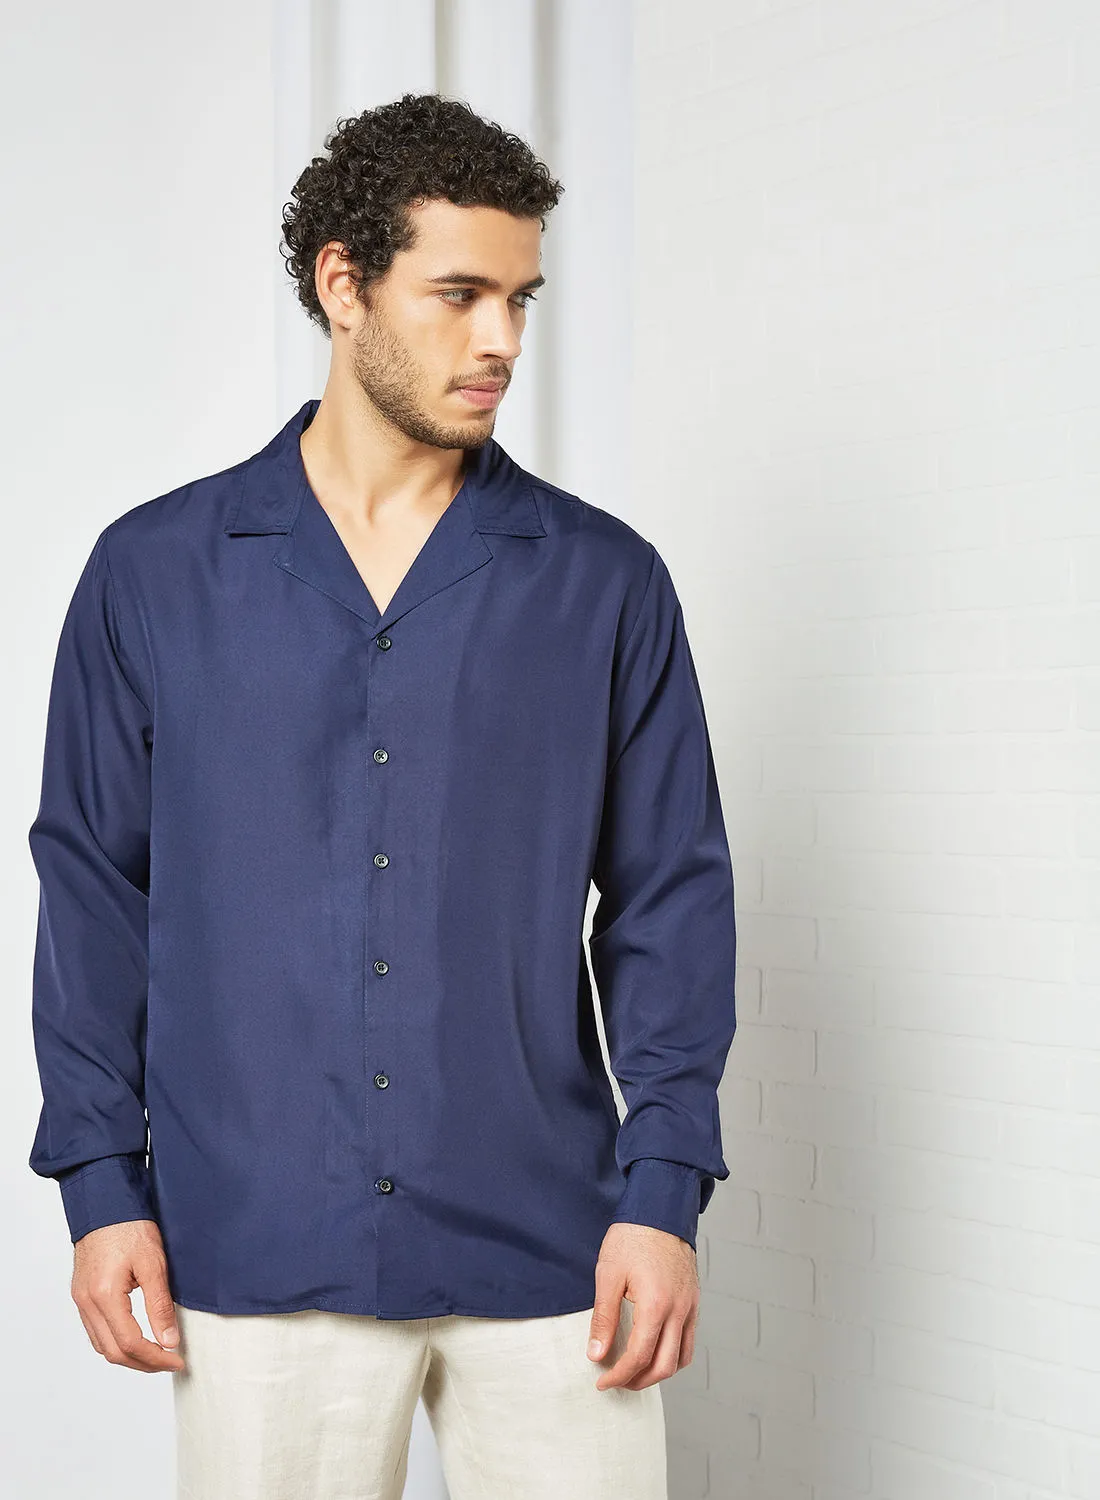 STATE 8 Casual Button Down Shirt Navy